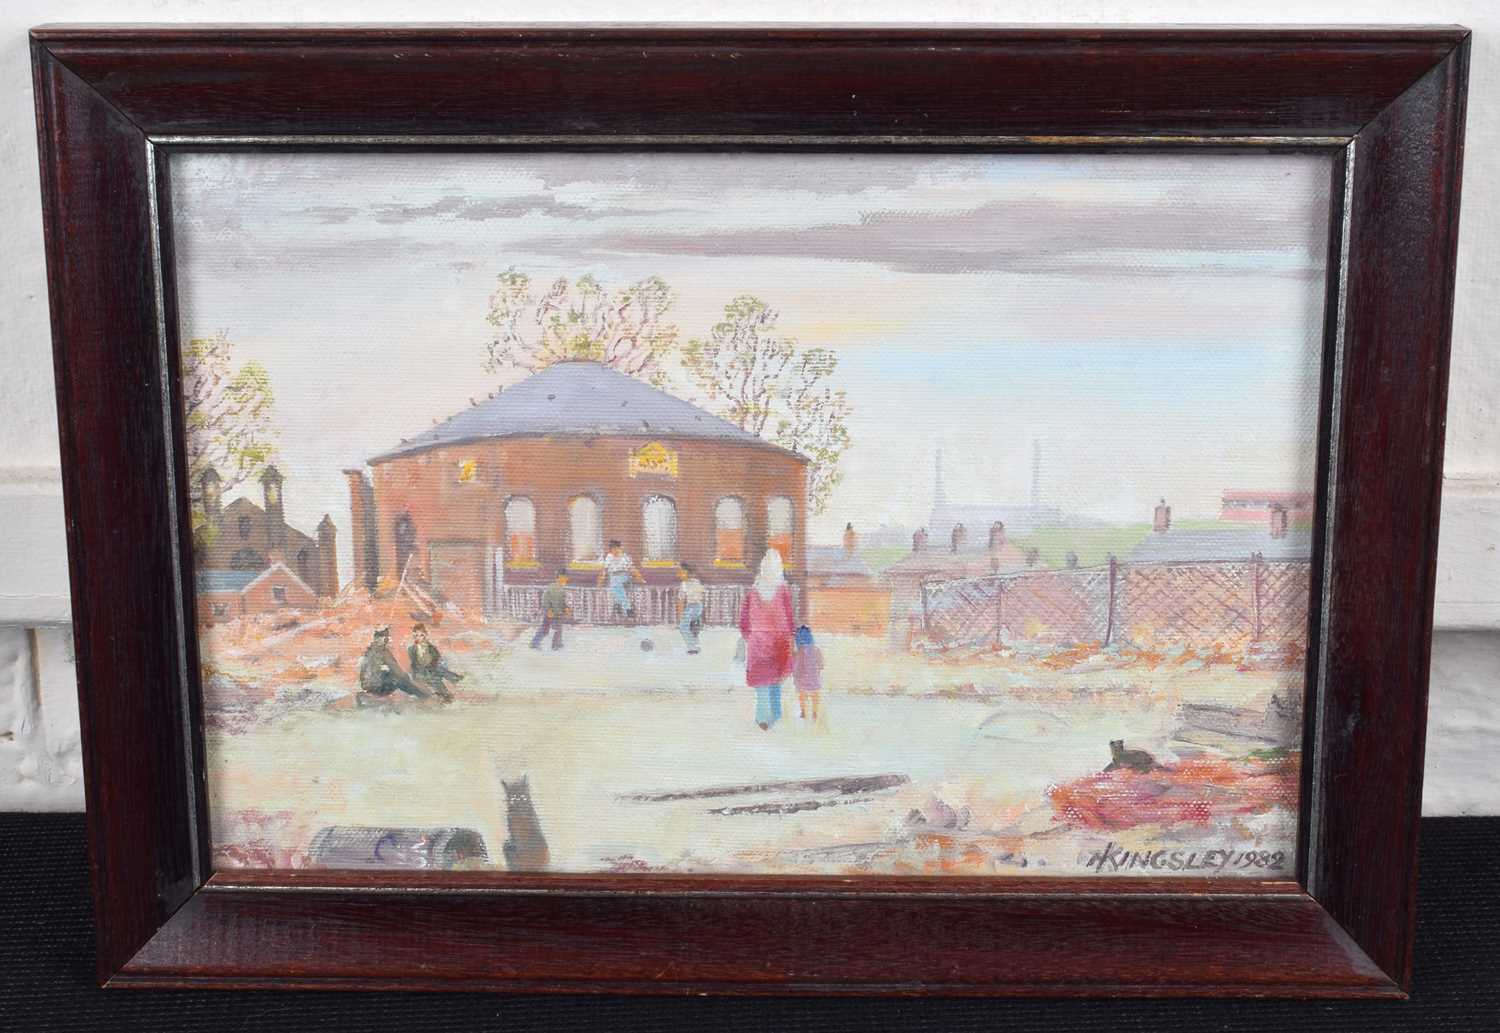 Harry Kingsley (British 1914-1998) "The Roundhouse, Ancoats" and another rural scene - Image 2 of 3